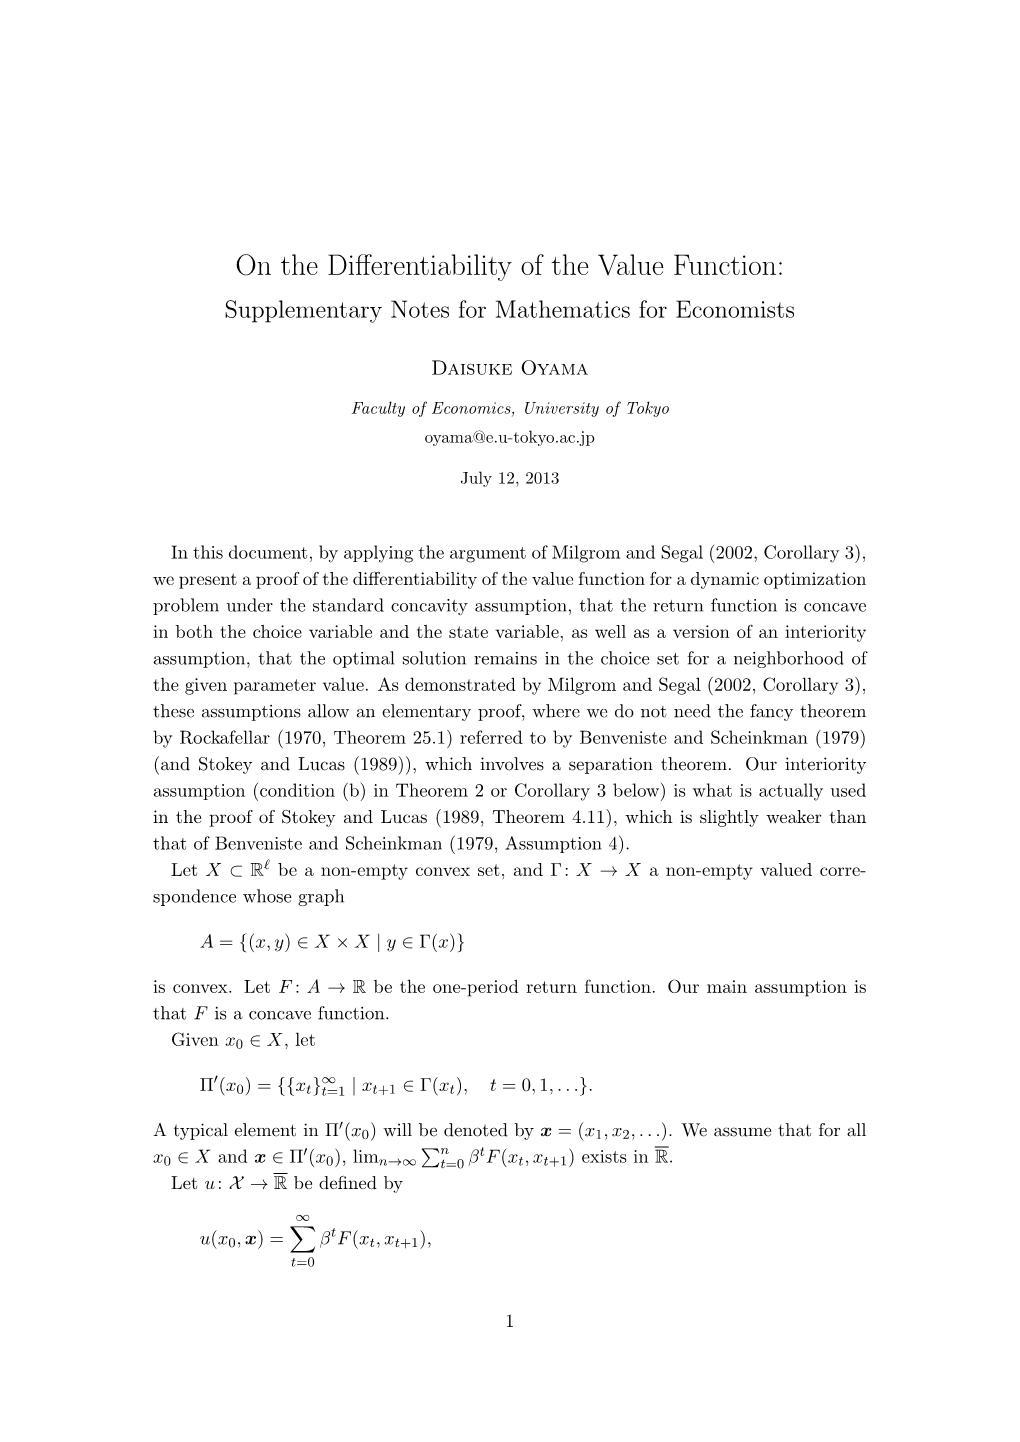 On the Differentiability of the Value Function